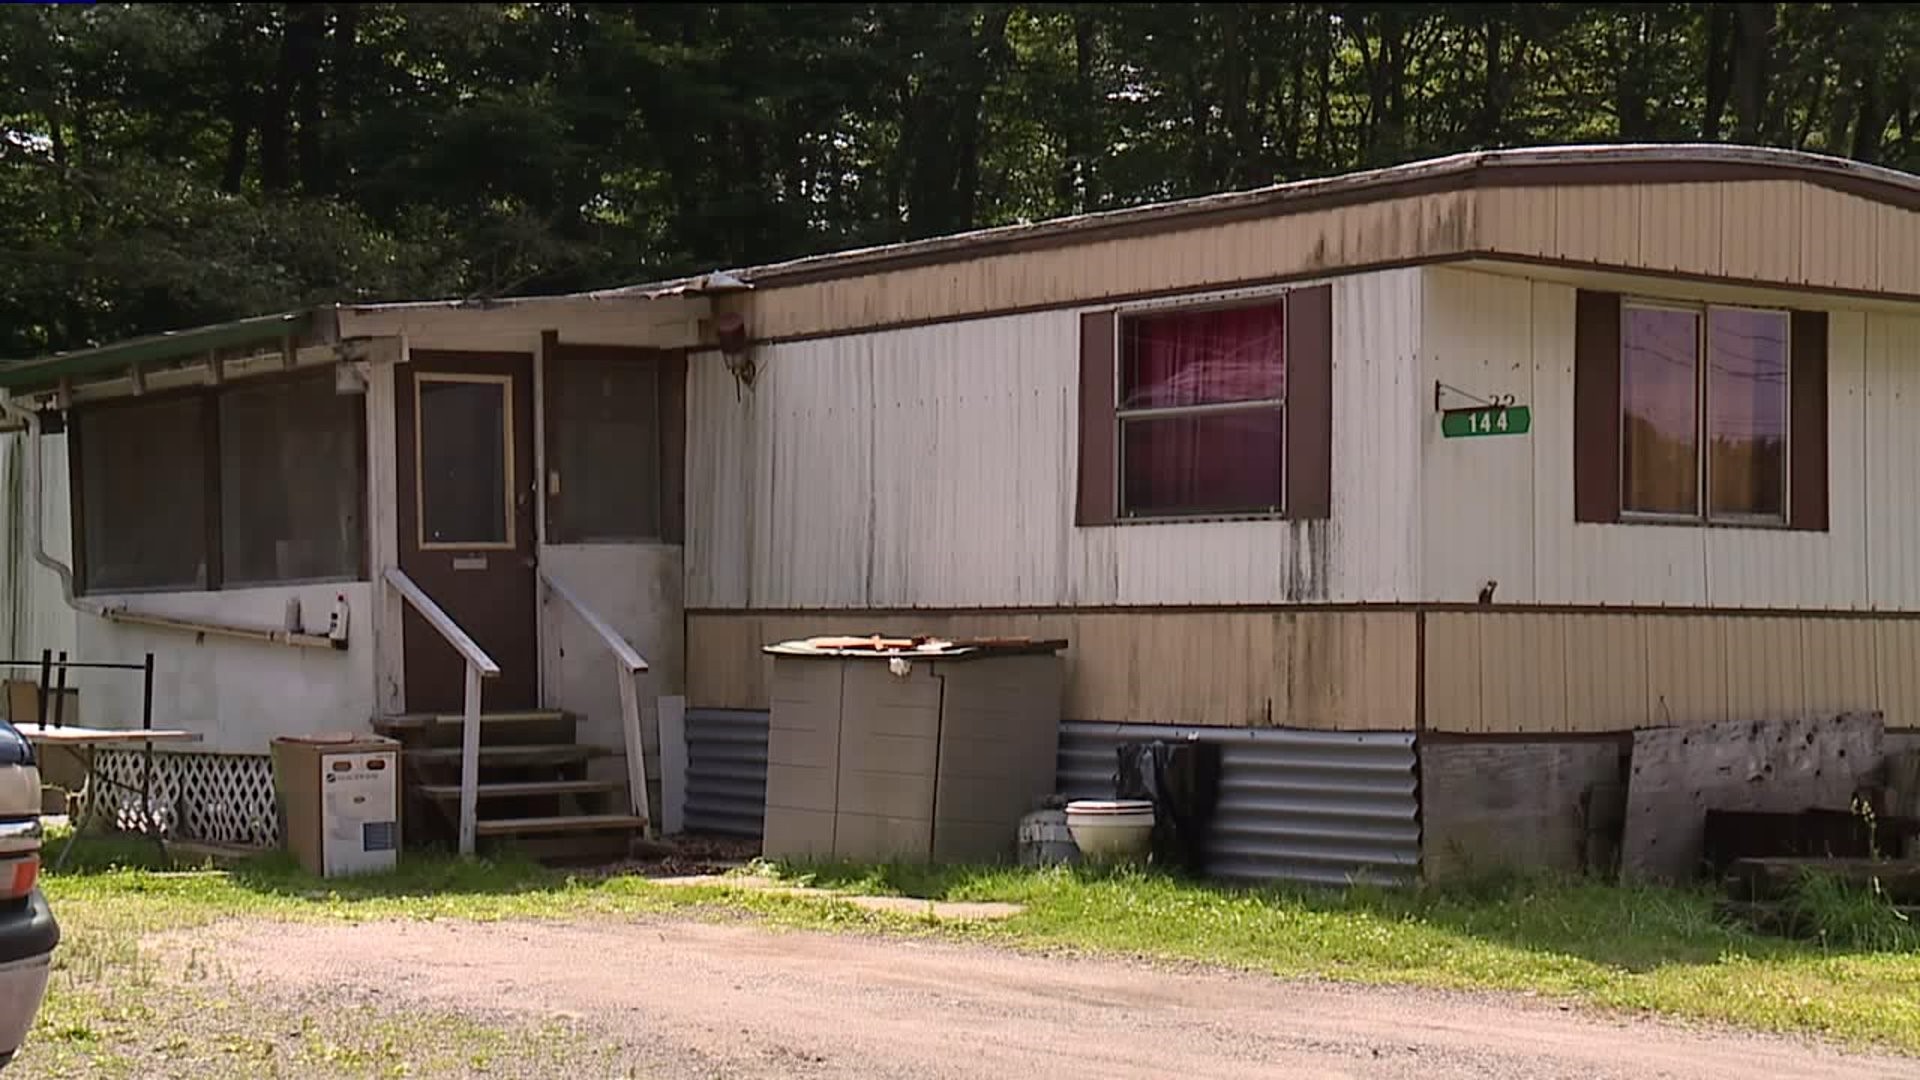 At Risk: Small Mobile Home Parks